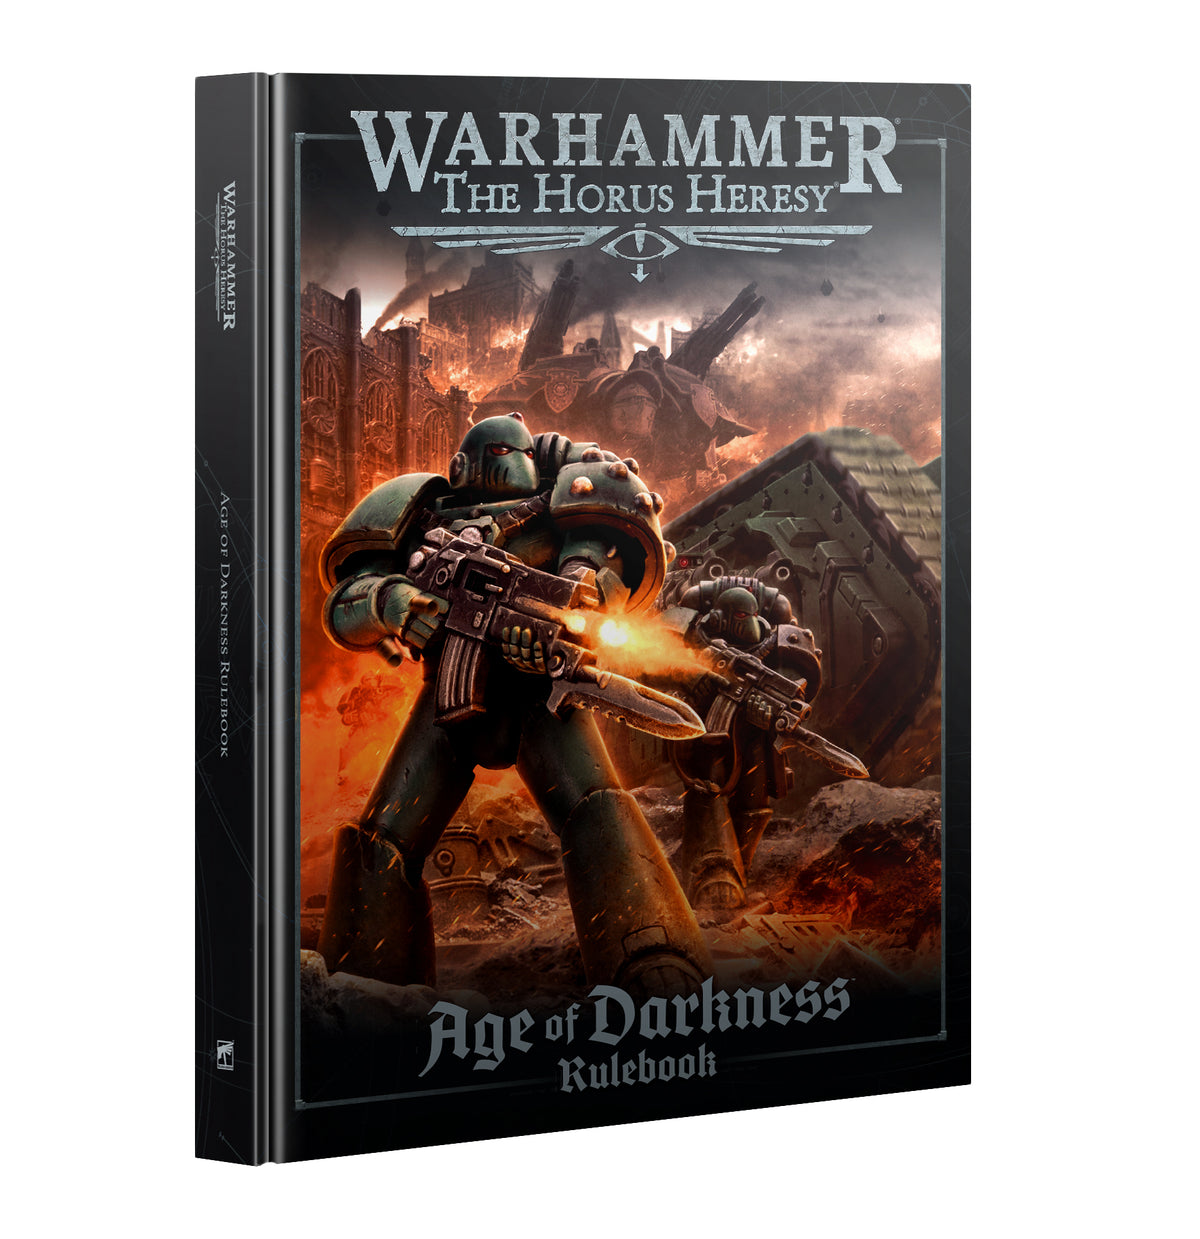 Age of Darkness Rulebook (Warhammer: The Horus Heresy)